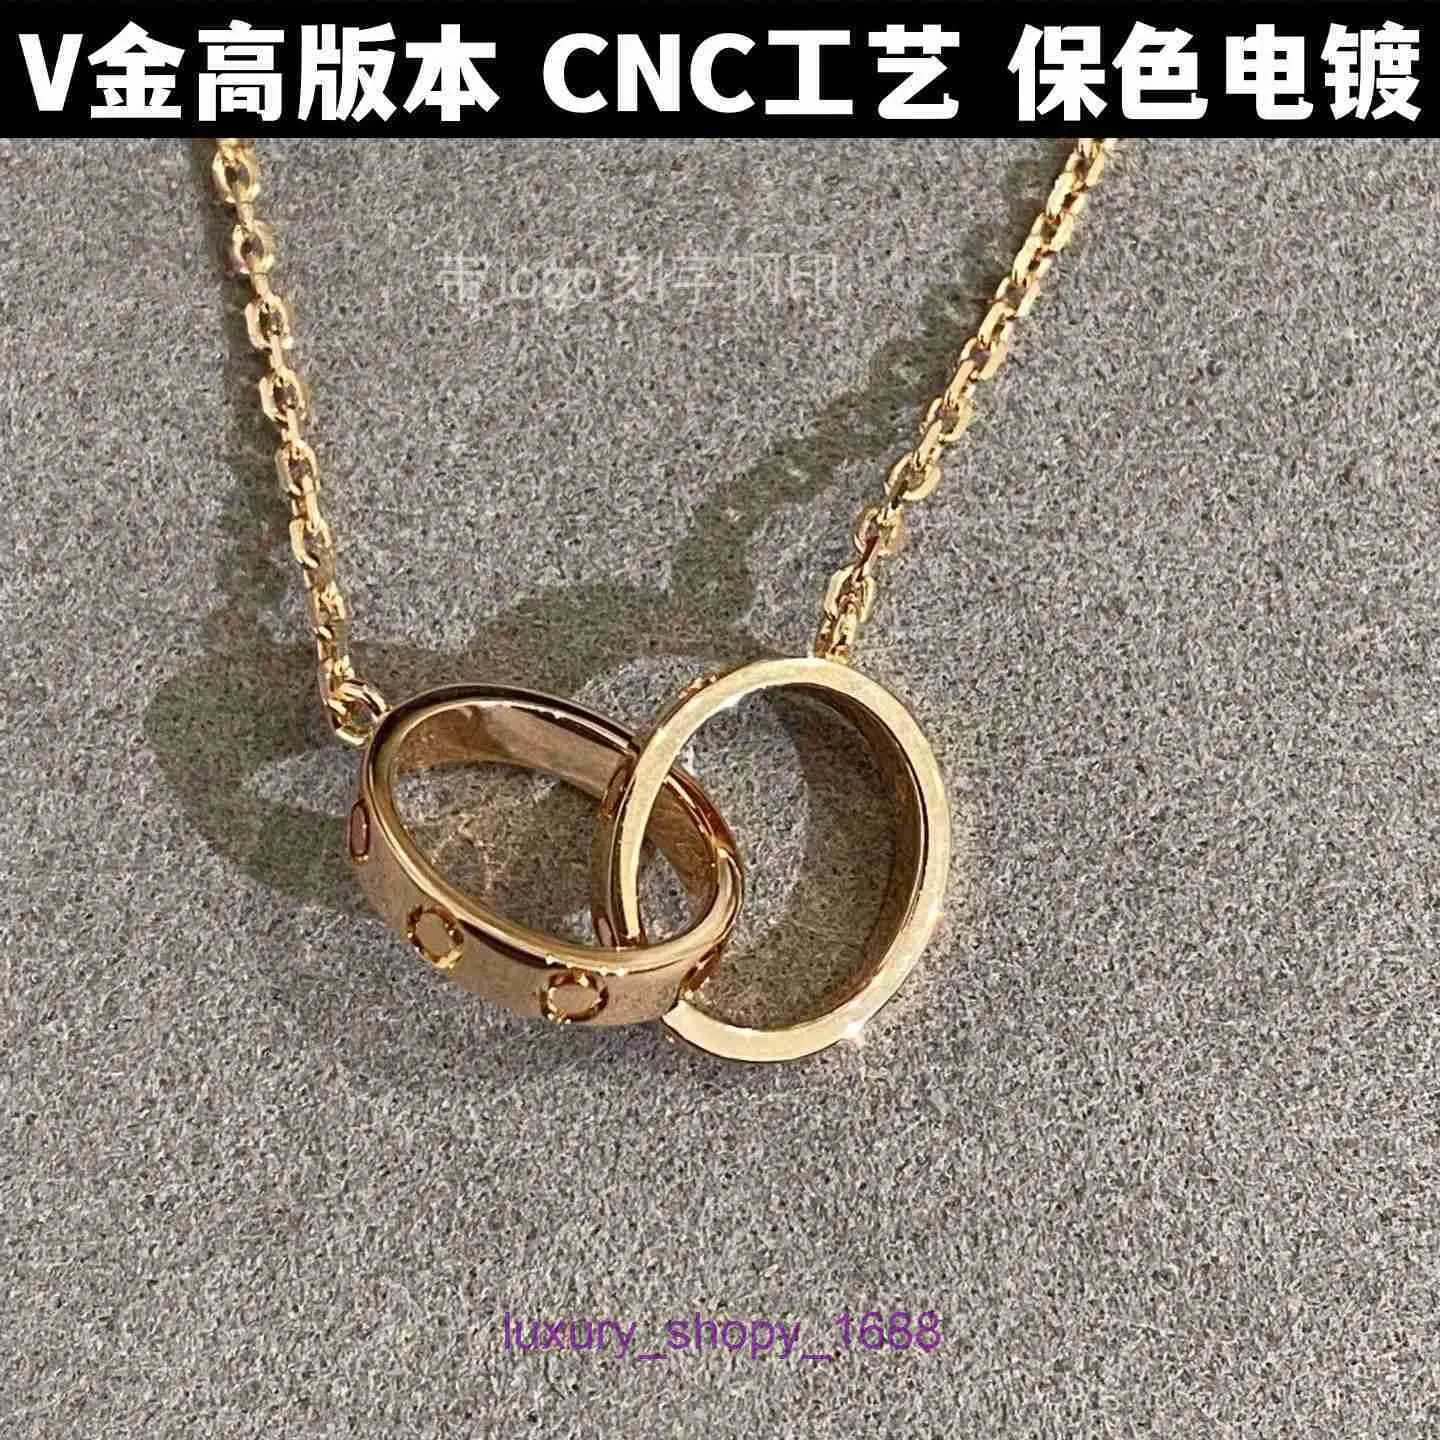 Car tires's necklace heart necklaces jewelry pendants Gold High Edition Card Family Double Ring Necklace Womens 18k Rose Full Diamond With Original Box